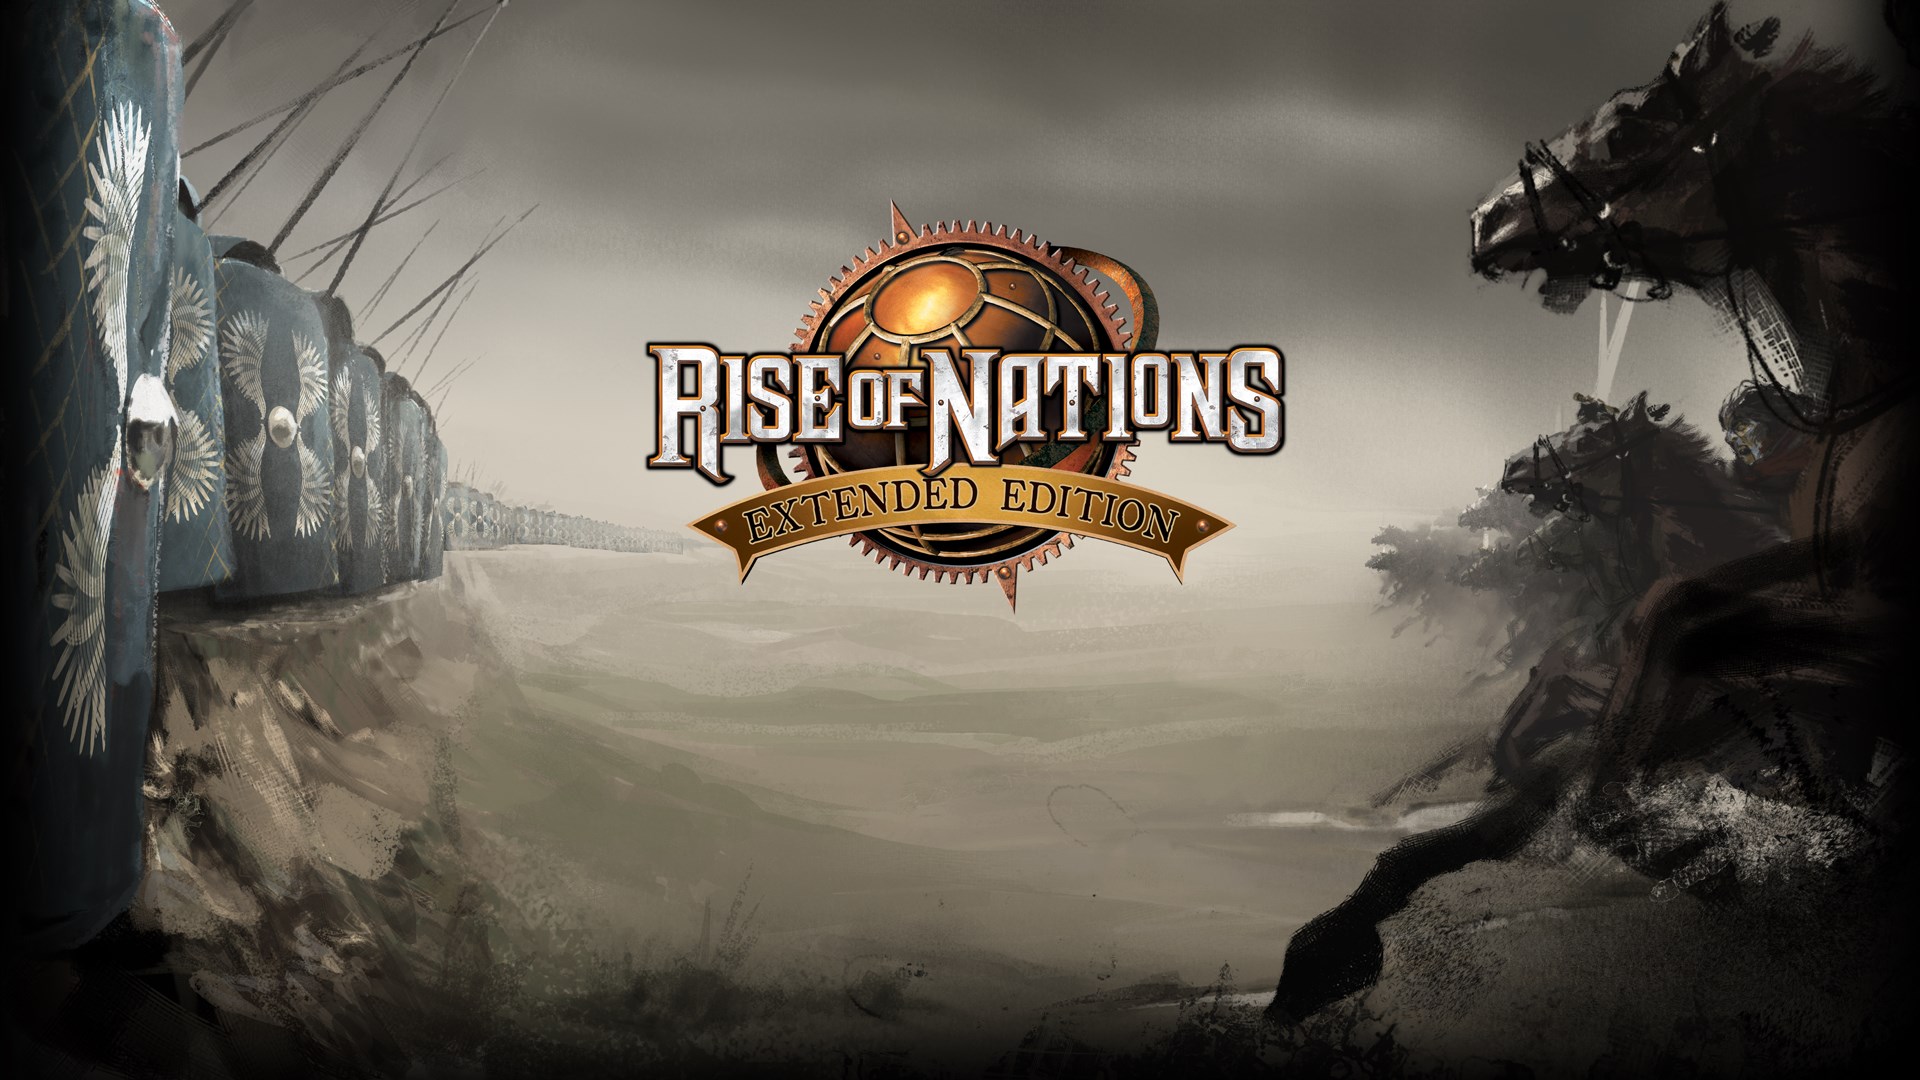 Download rise of nations for windows 8.1